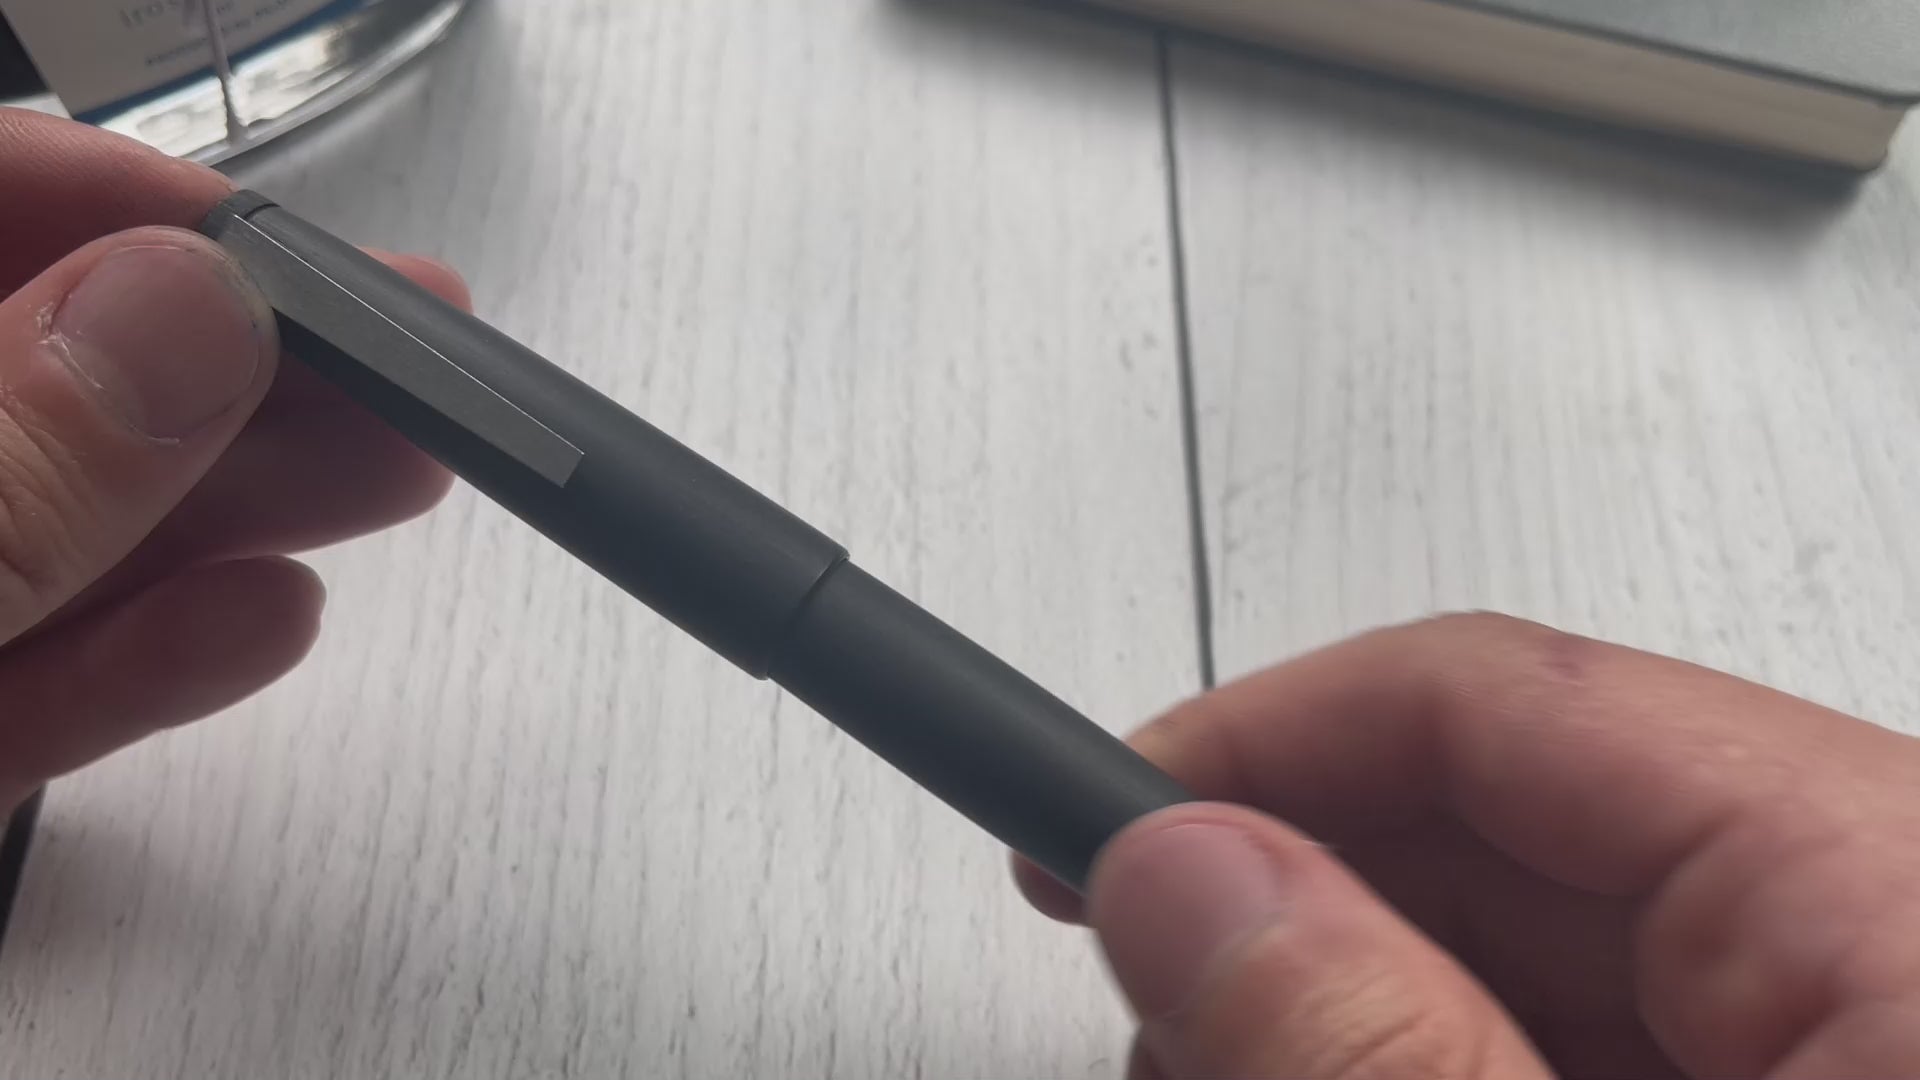 Video of a LAMY 2000 fountain pen in the hand